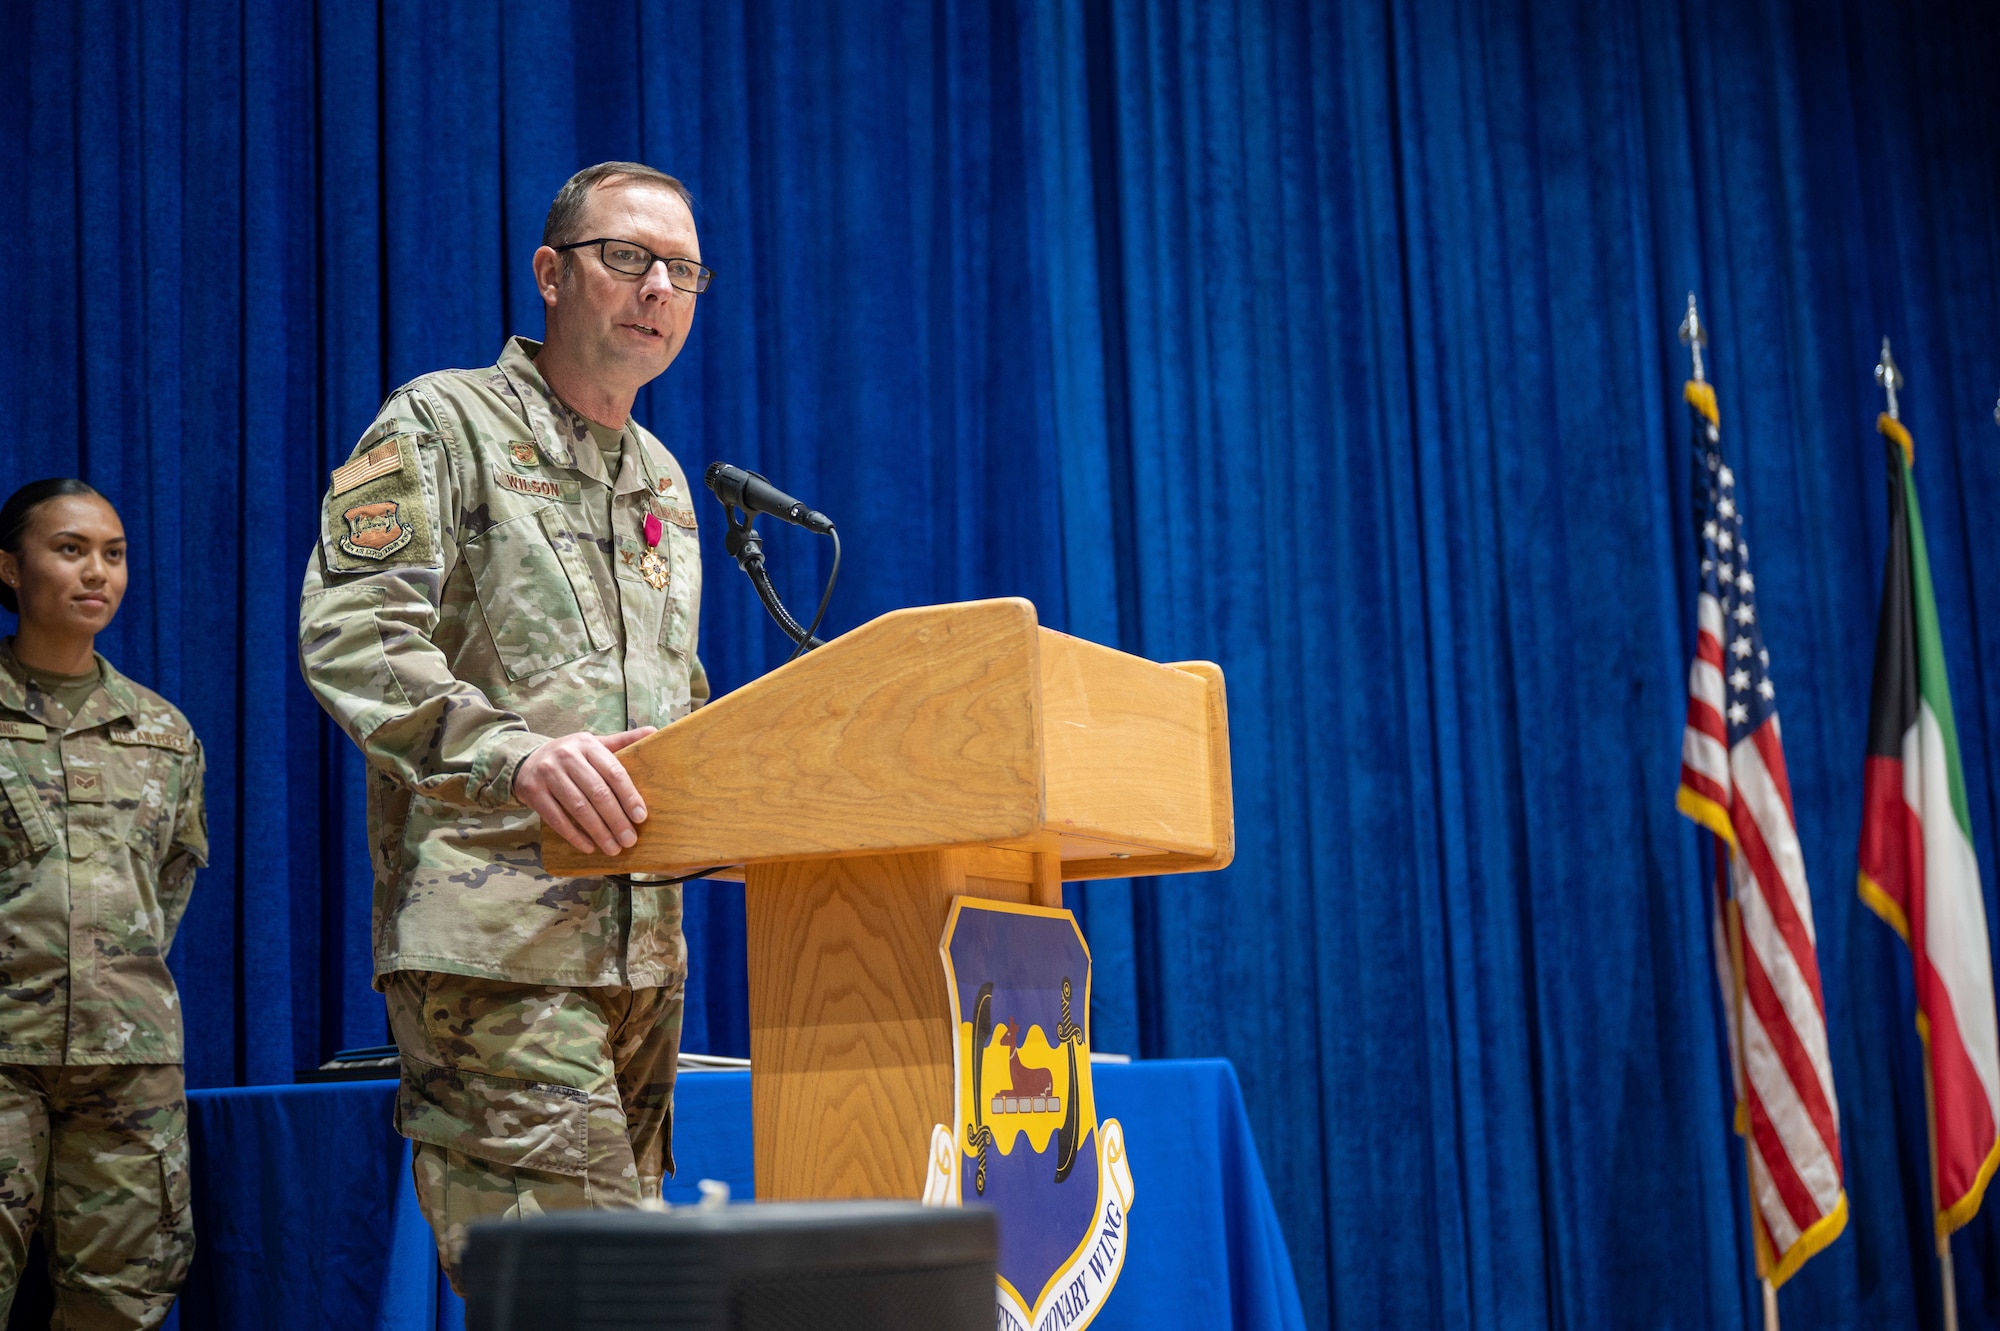 The 386th Air Expeditionary Wing hosted a change of command ceremony at the base theater July 1, 2022.  This was the final ceremony for the 386th AEW as it shifted from the expeditionary group construct to the Air Staff model.